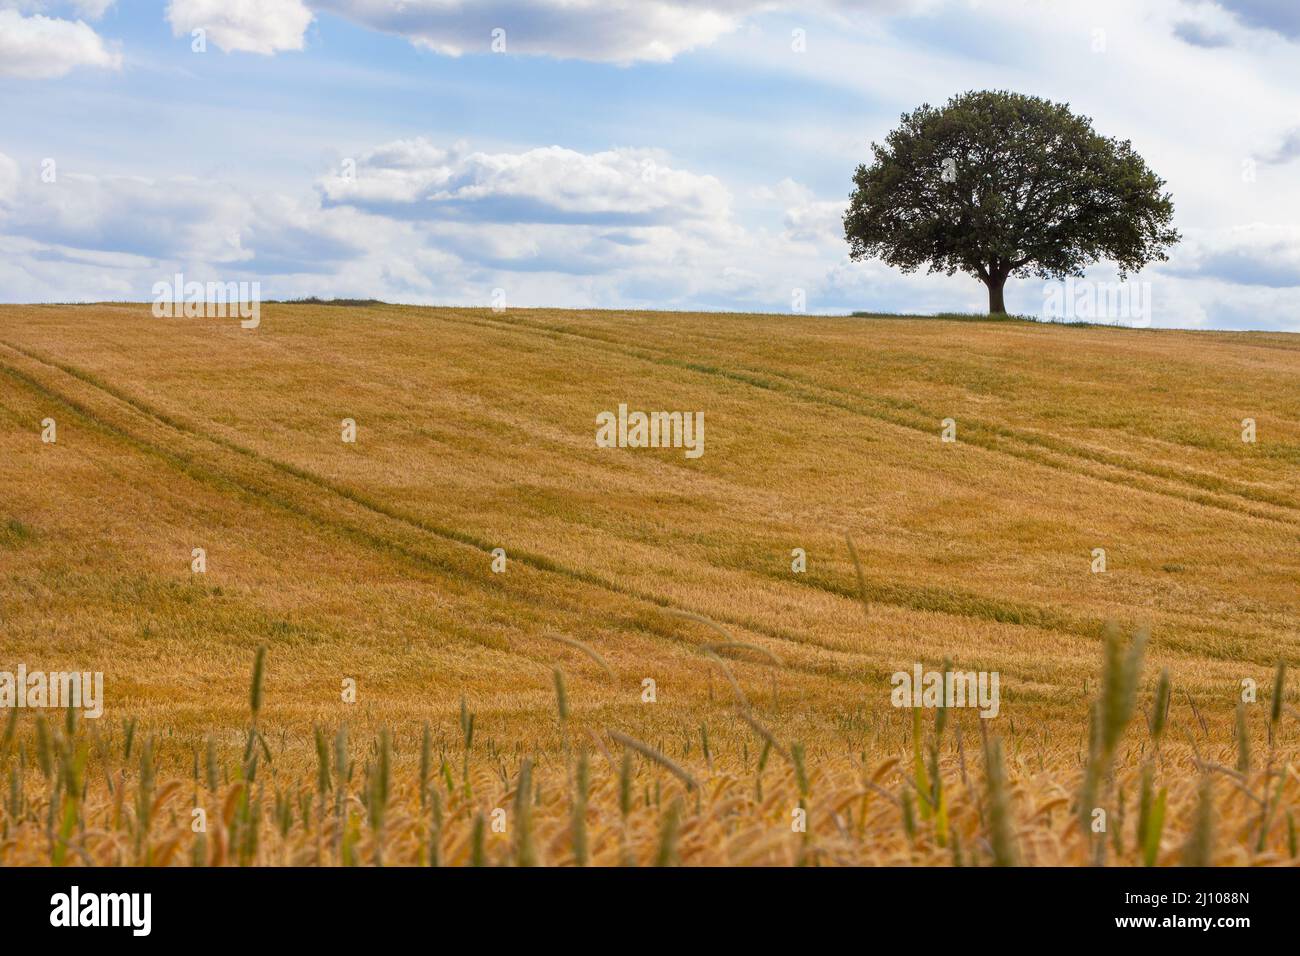 Oak tree on the horizon in a field of wheat or Barley Stock Photo